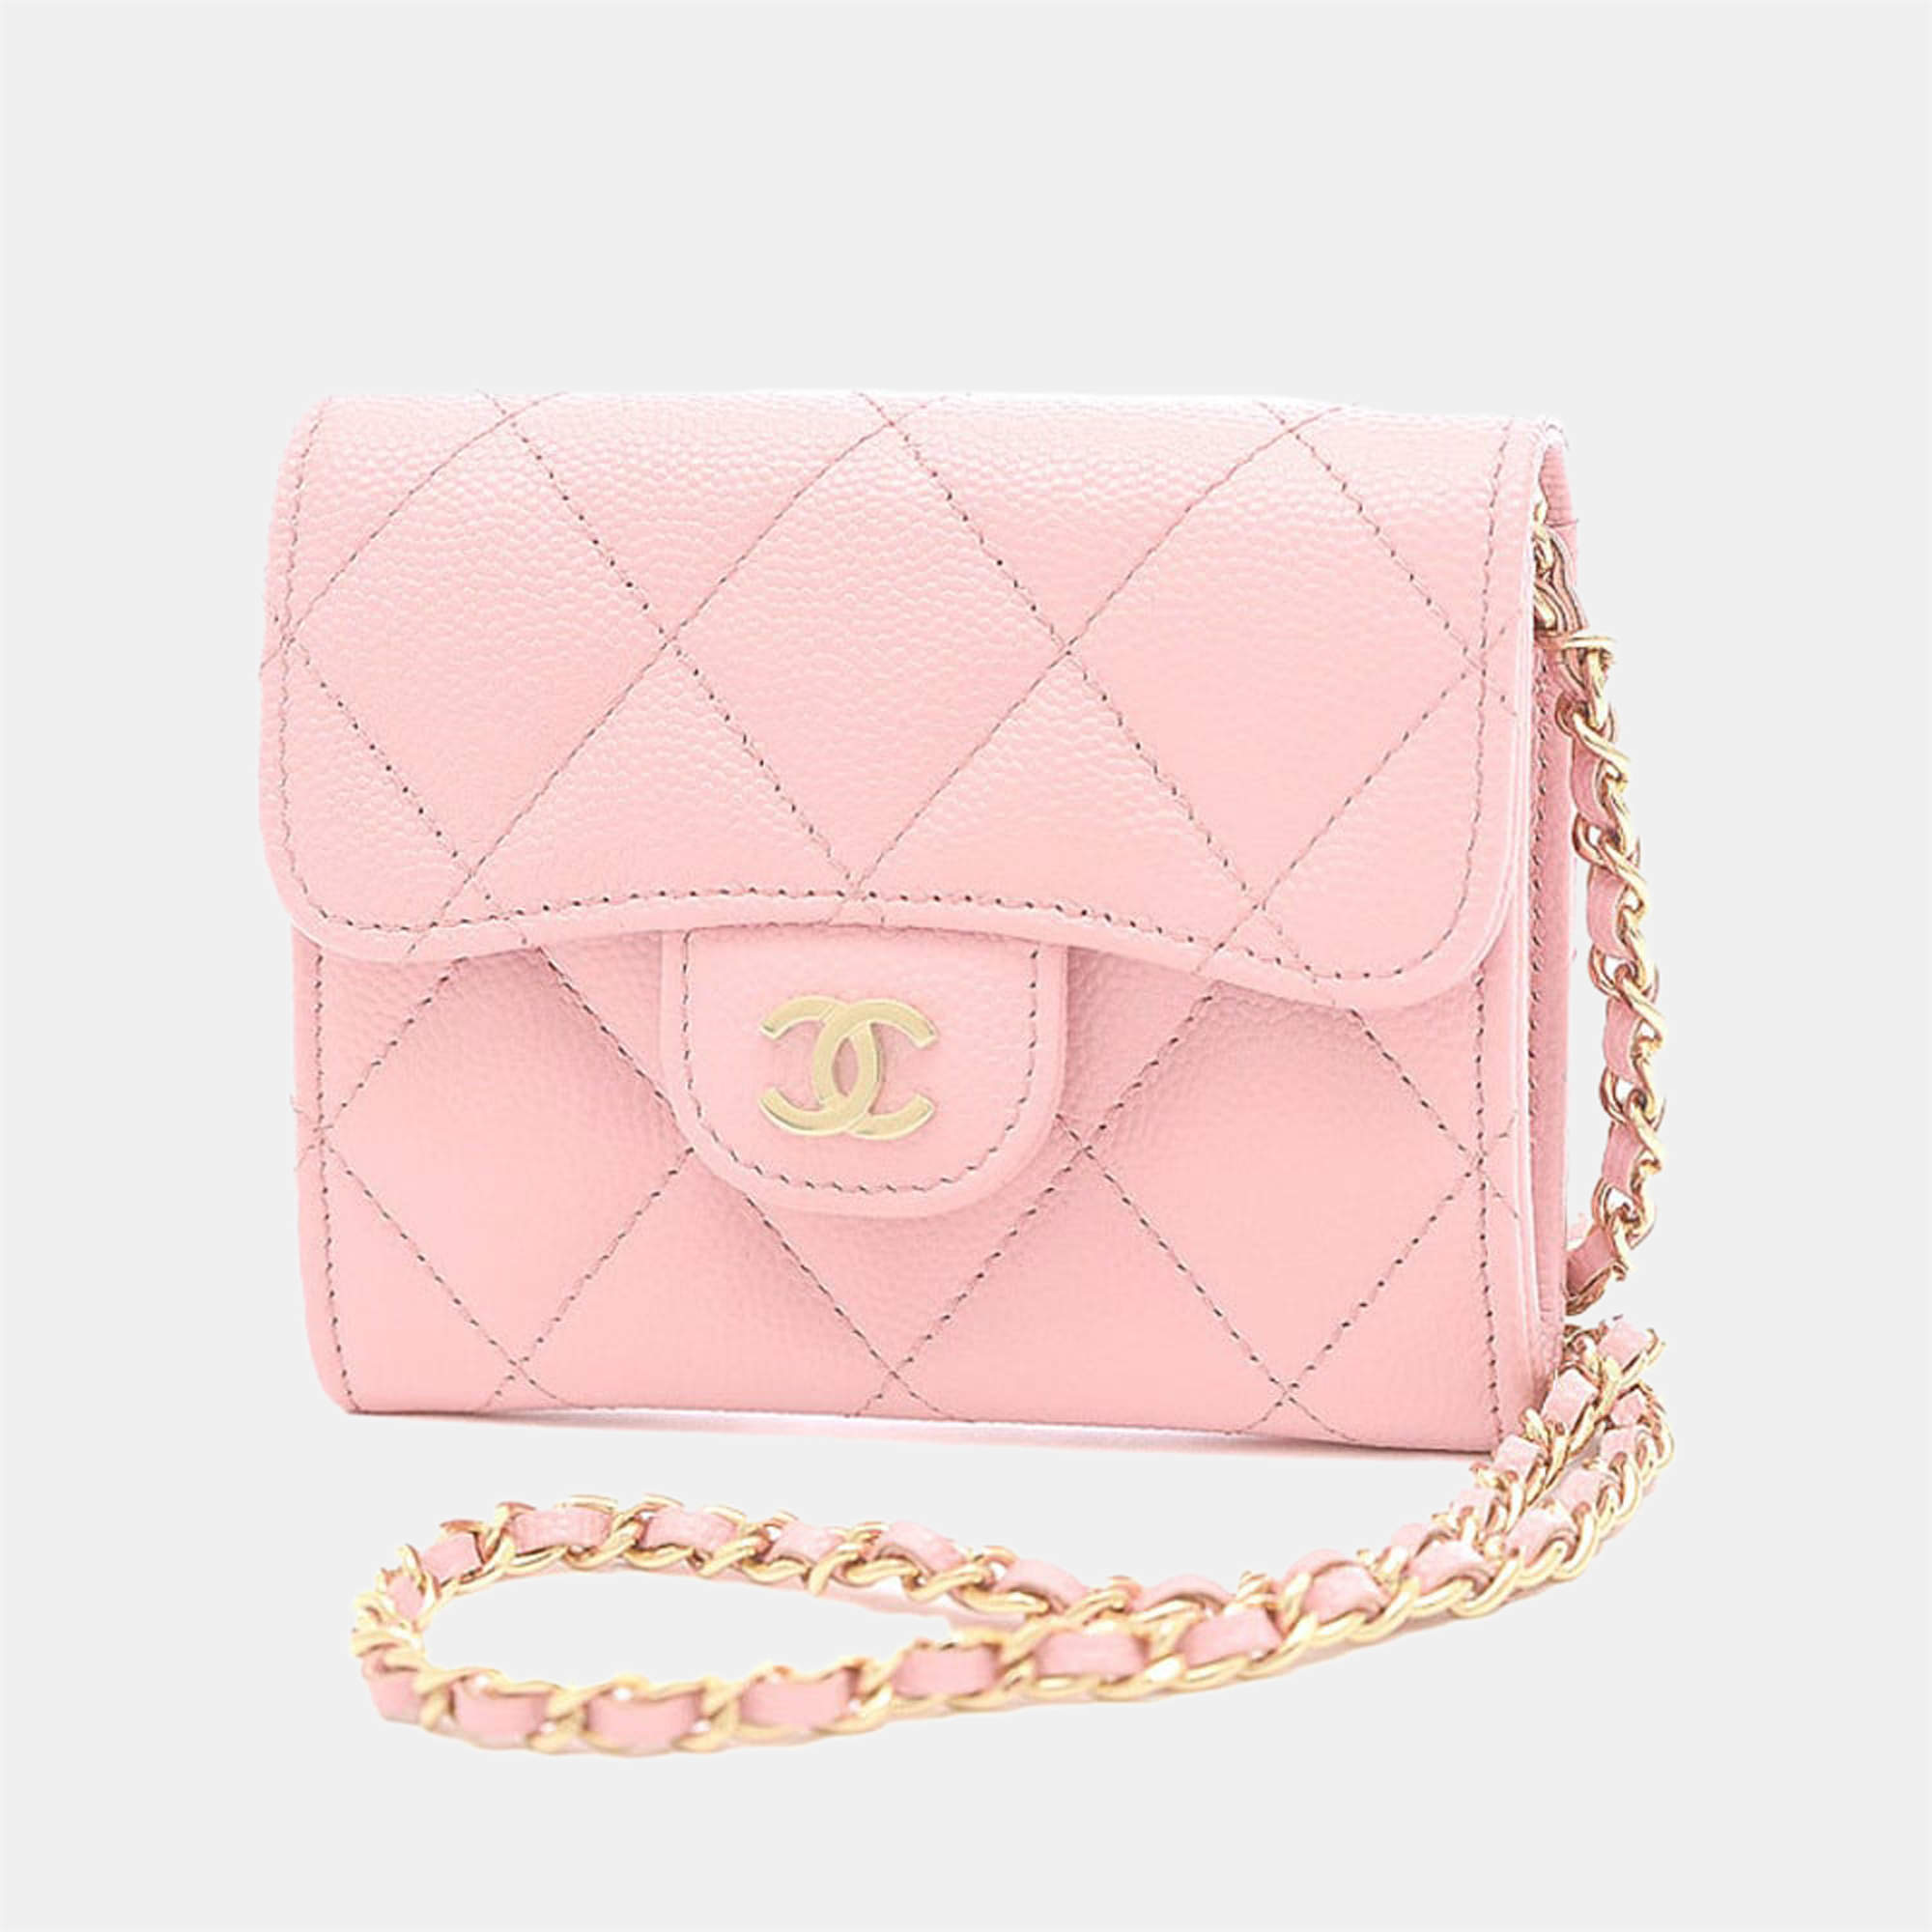 Chanel  Top Handle Wallet on Chain  Pink Caviar  CGHW  Brand New   Bagista